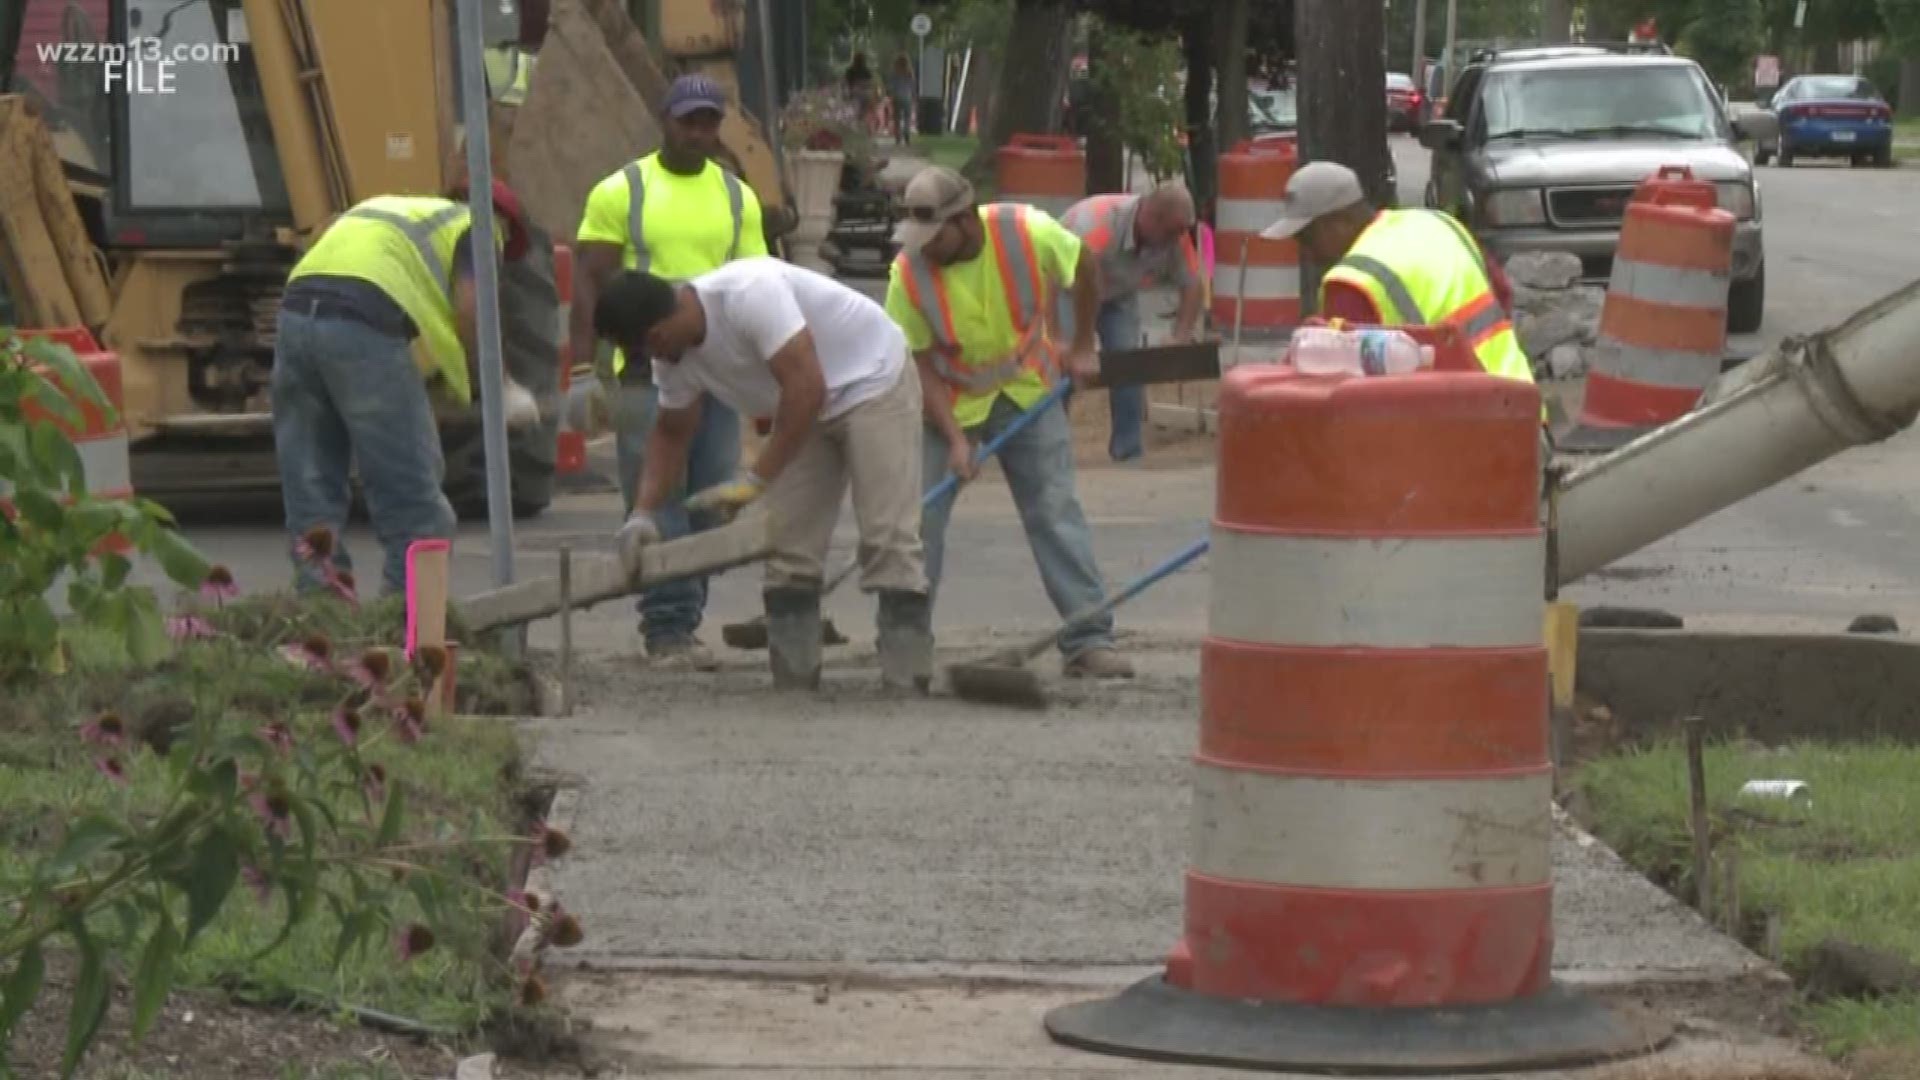 Those driving, walking, and biking through Grand Rapids can expect to see improvements to more streets and sidewalks thanks to the voter-approved "Vital Streets Initiative." The city has inspected and repaired roughly 25% of the 870-mile sidewalk network.